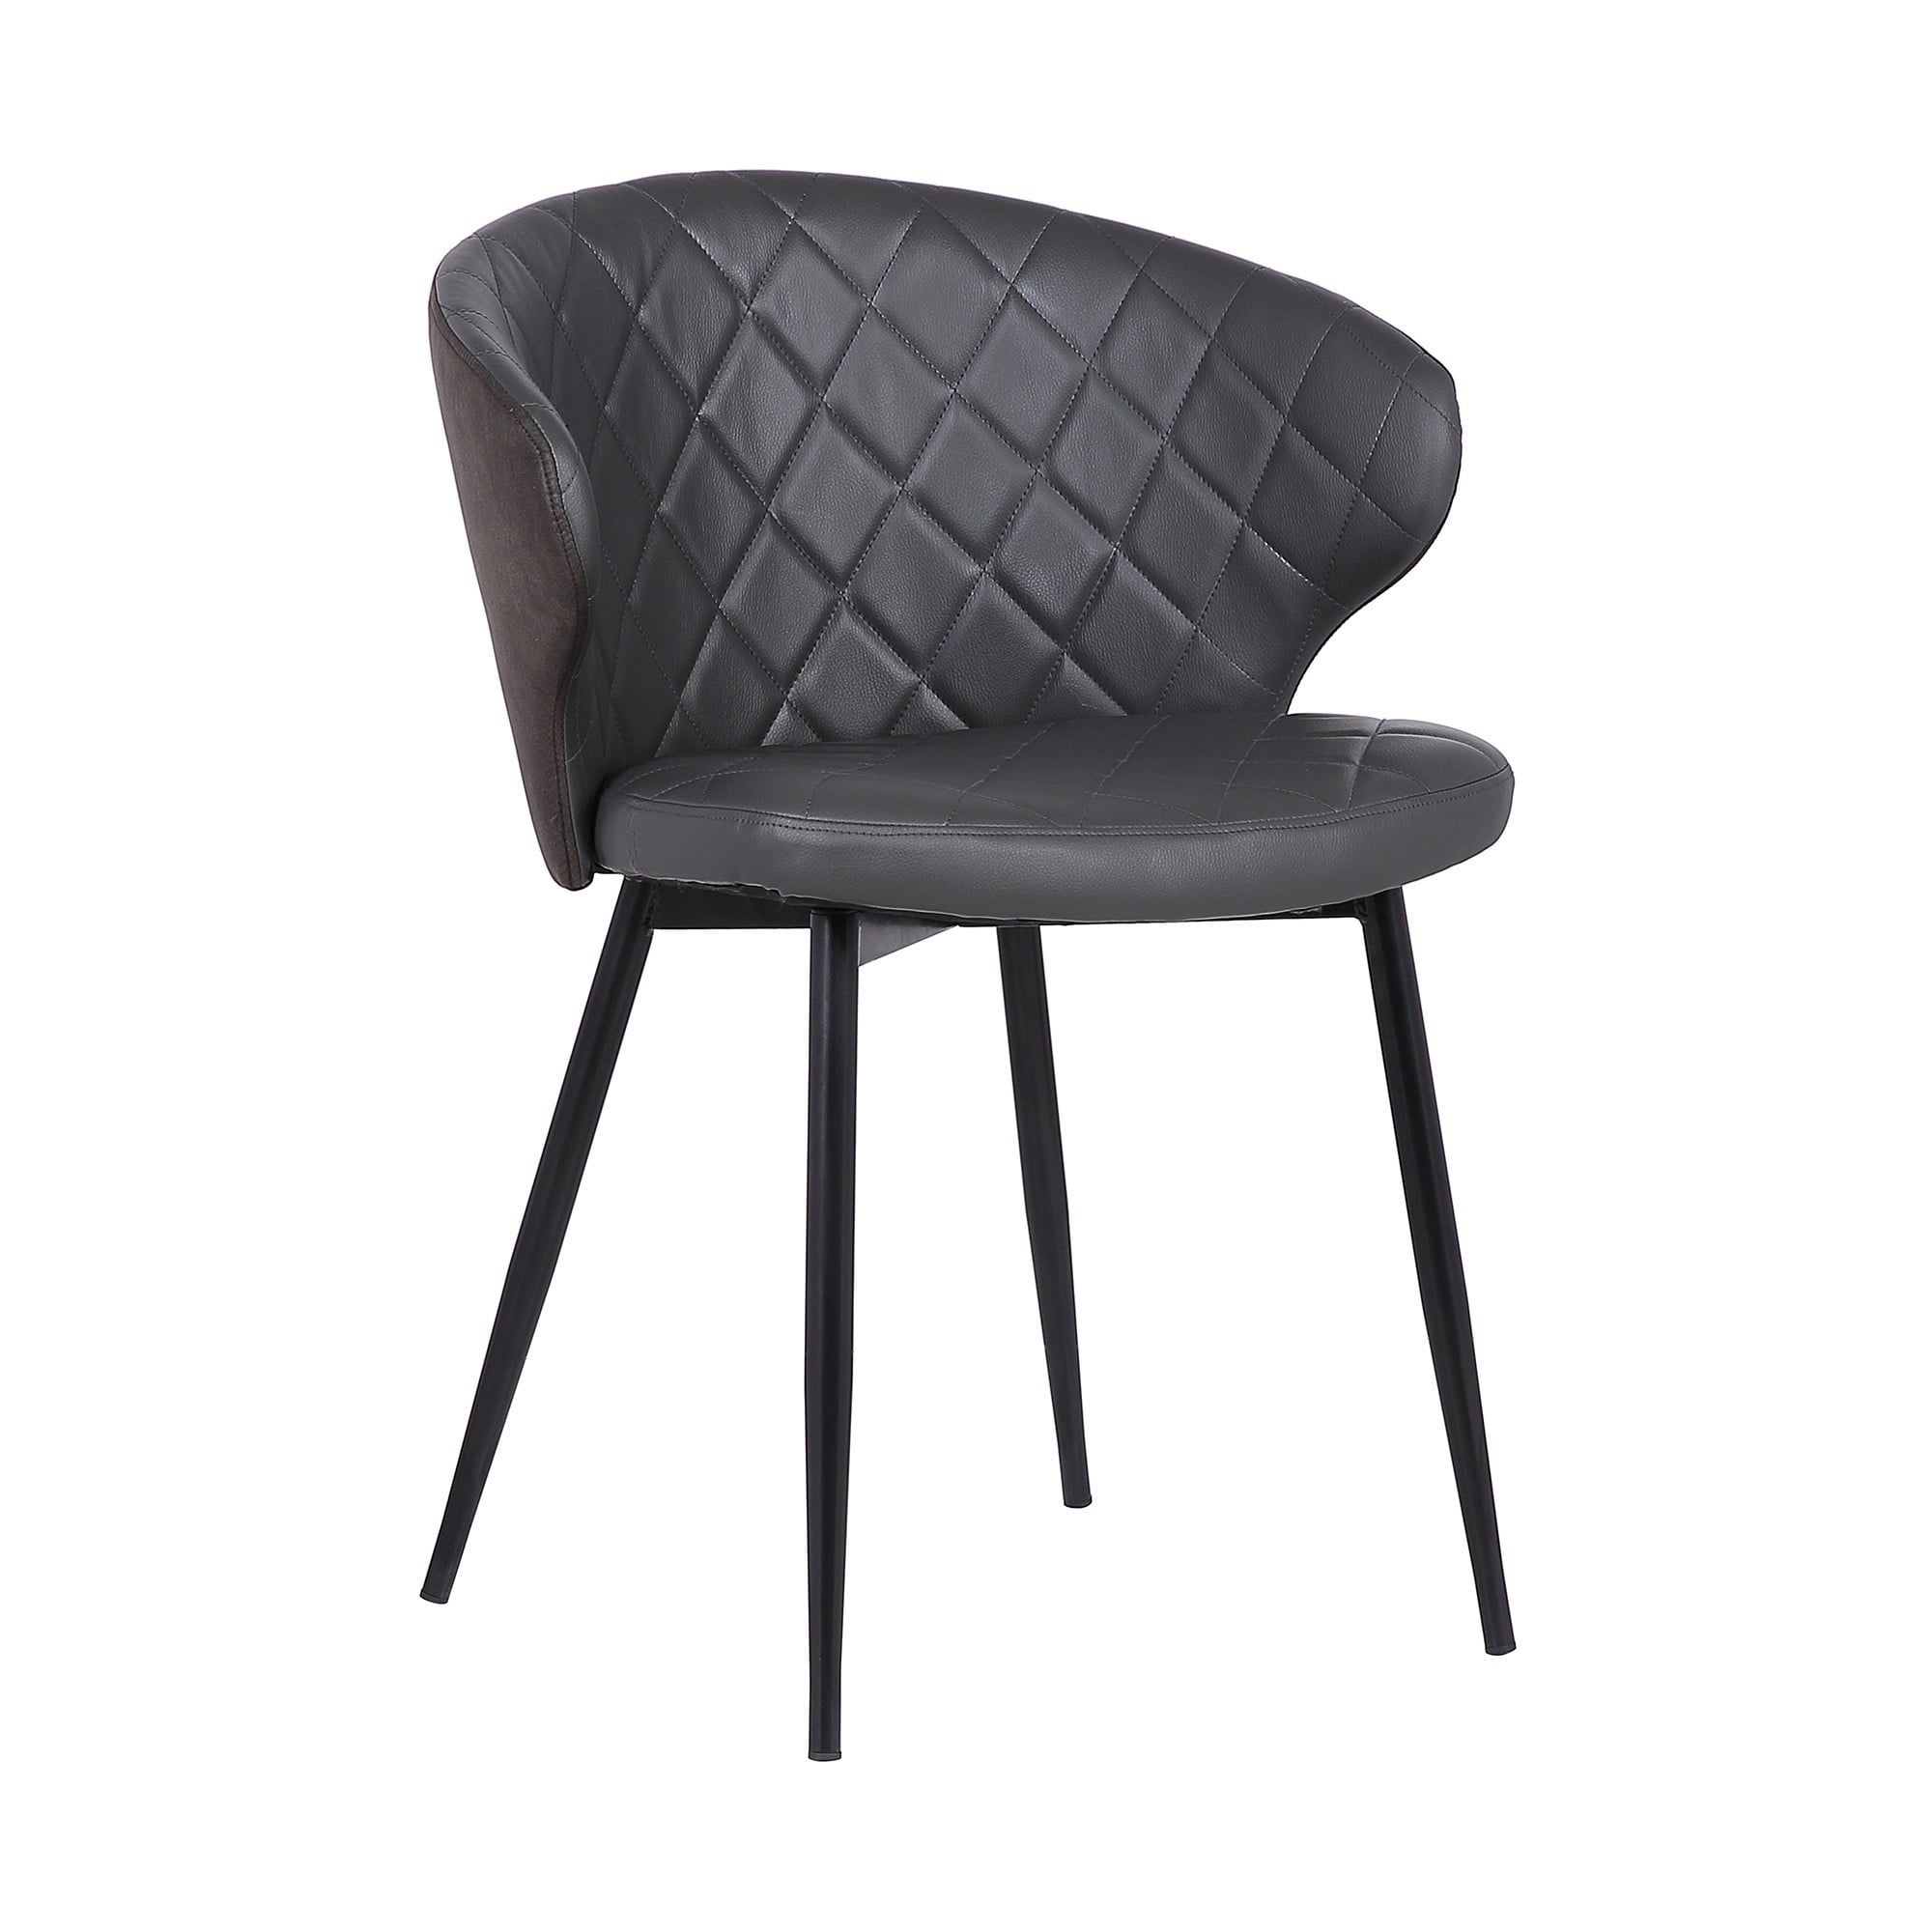 Benjara 19 Inch Leatherette Curved Armchair Gray